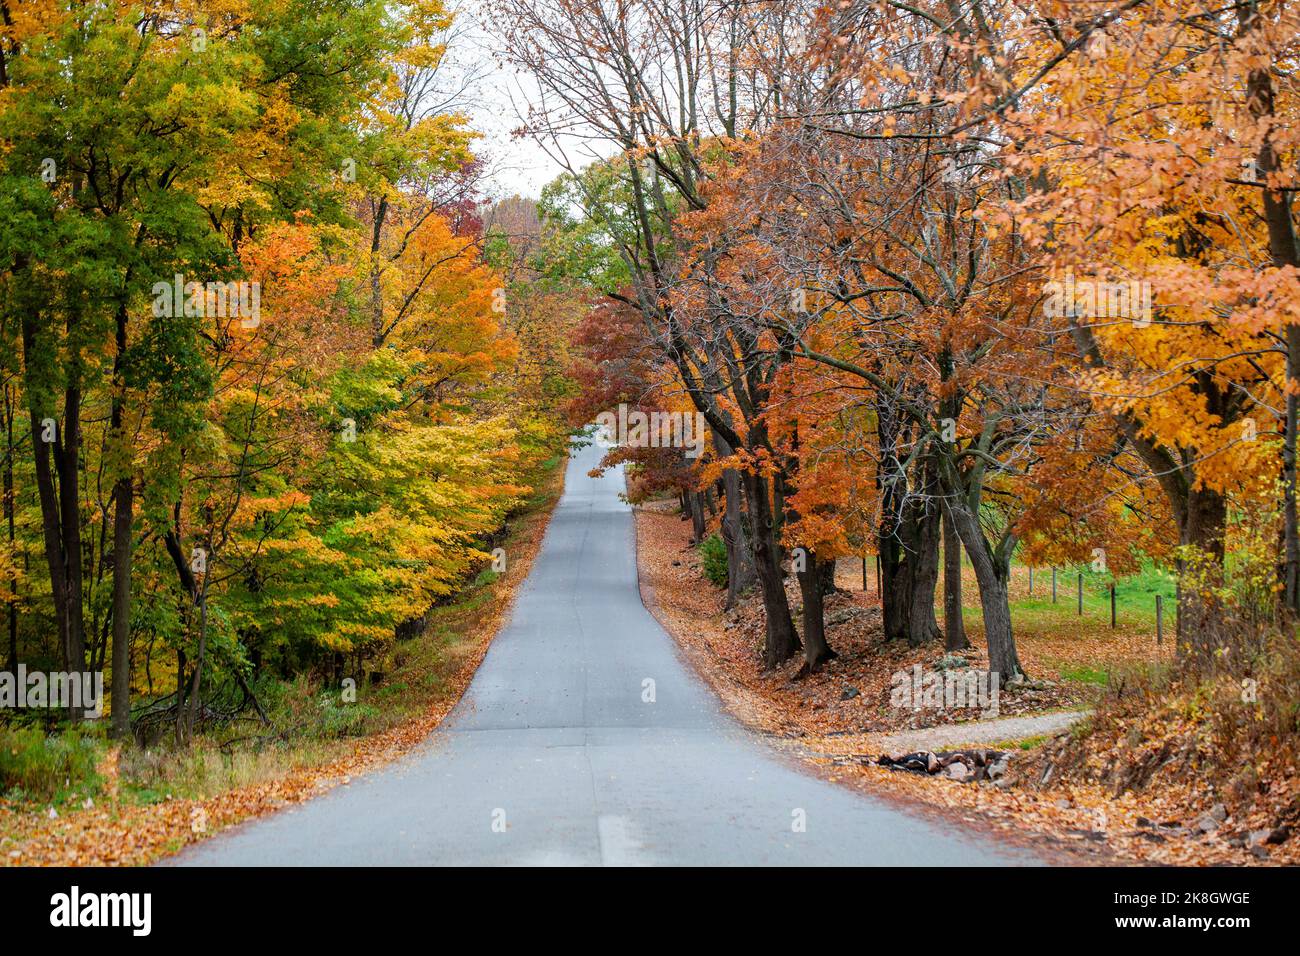 Wausau Ave in October with colorful autumn trees in Wausau, Wisconsin, horizontal Stock Photo